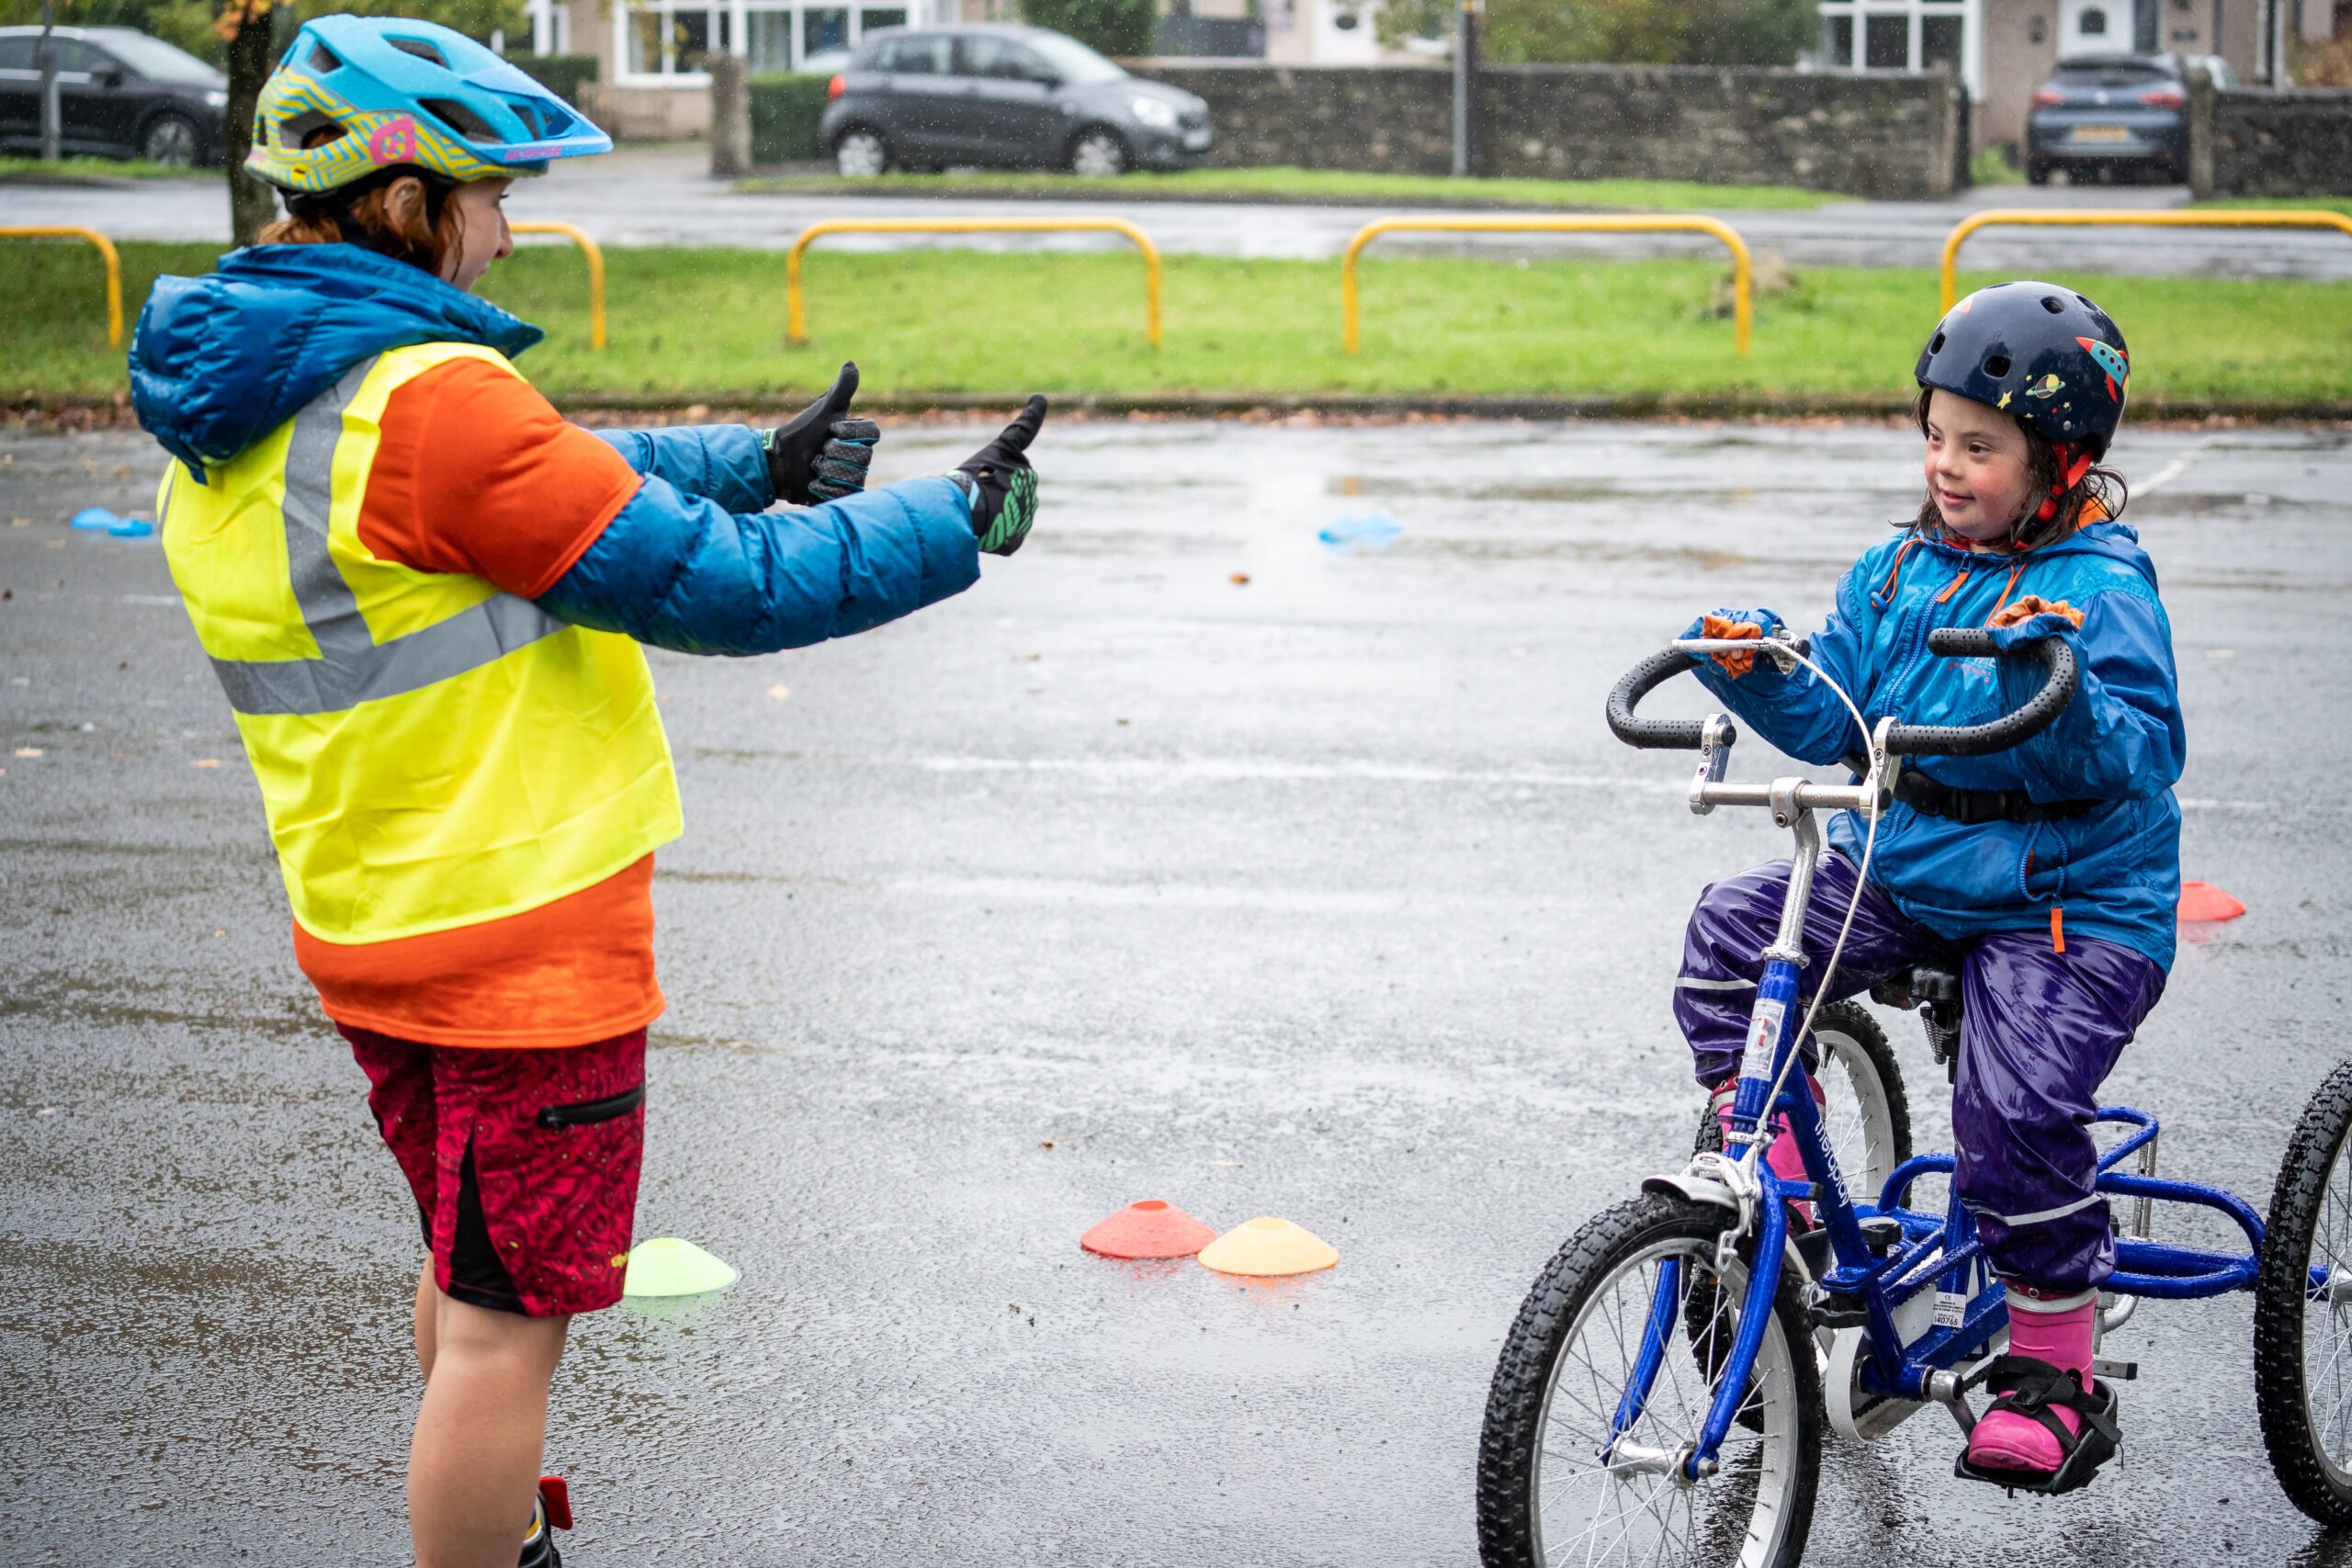 An instructor wearing a blue coat and high vis vest gives the thumbs up to a girl wearing waterproofs and riding a tricycle.